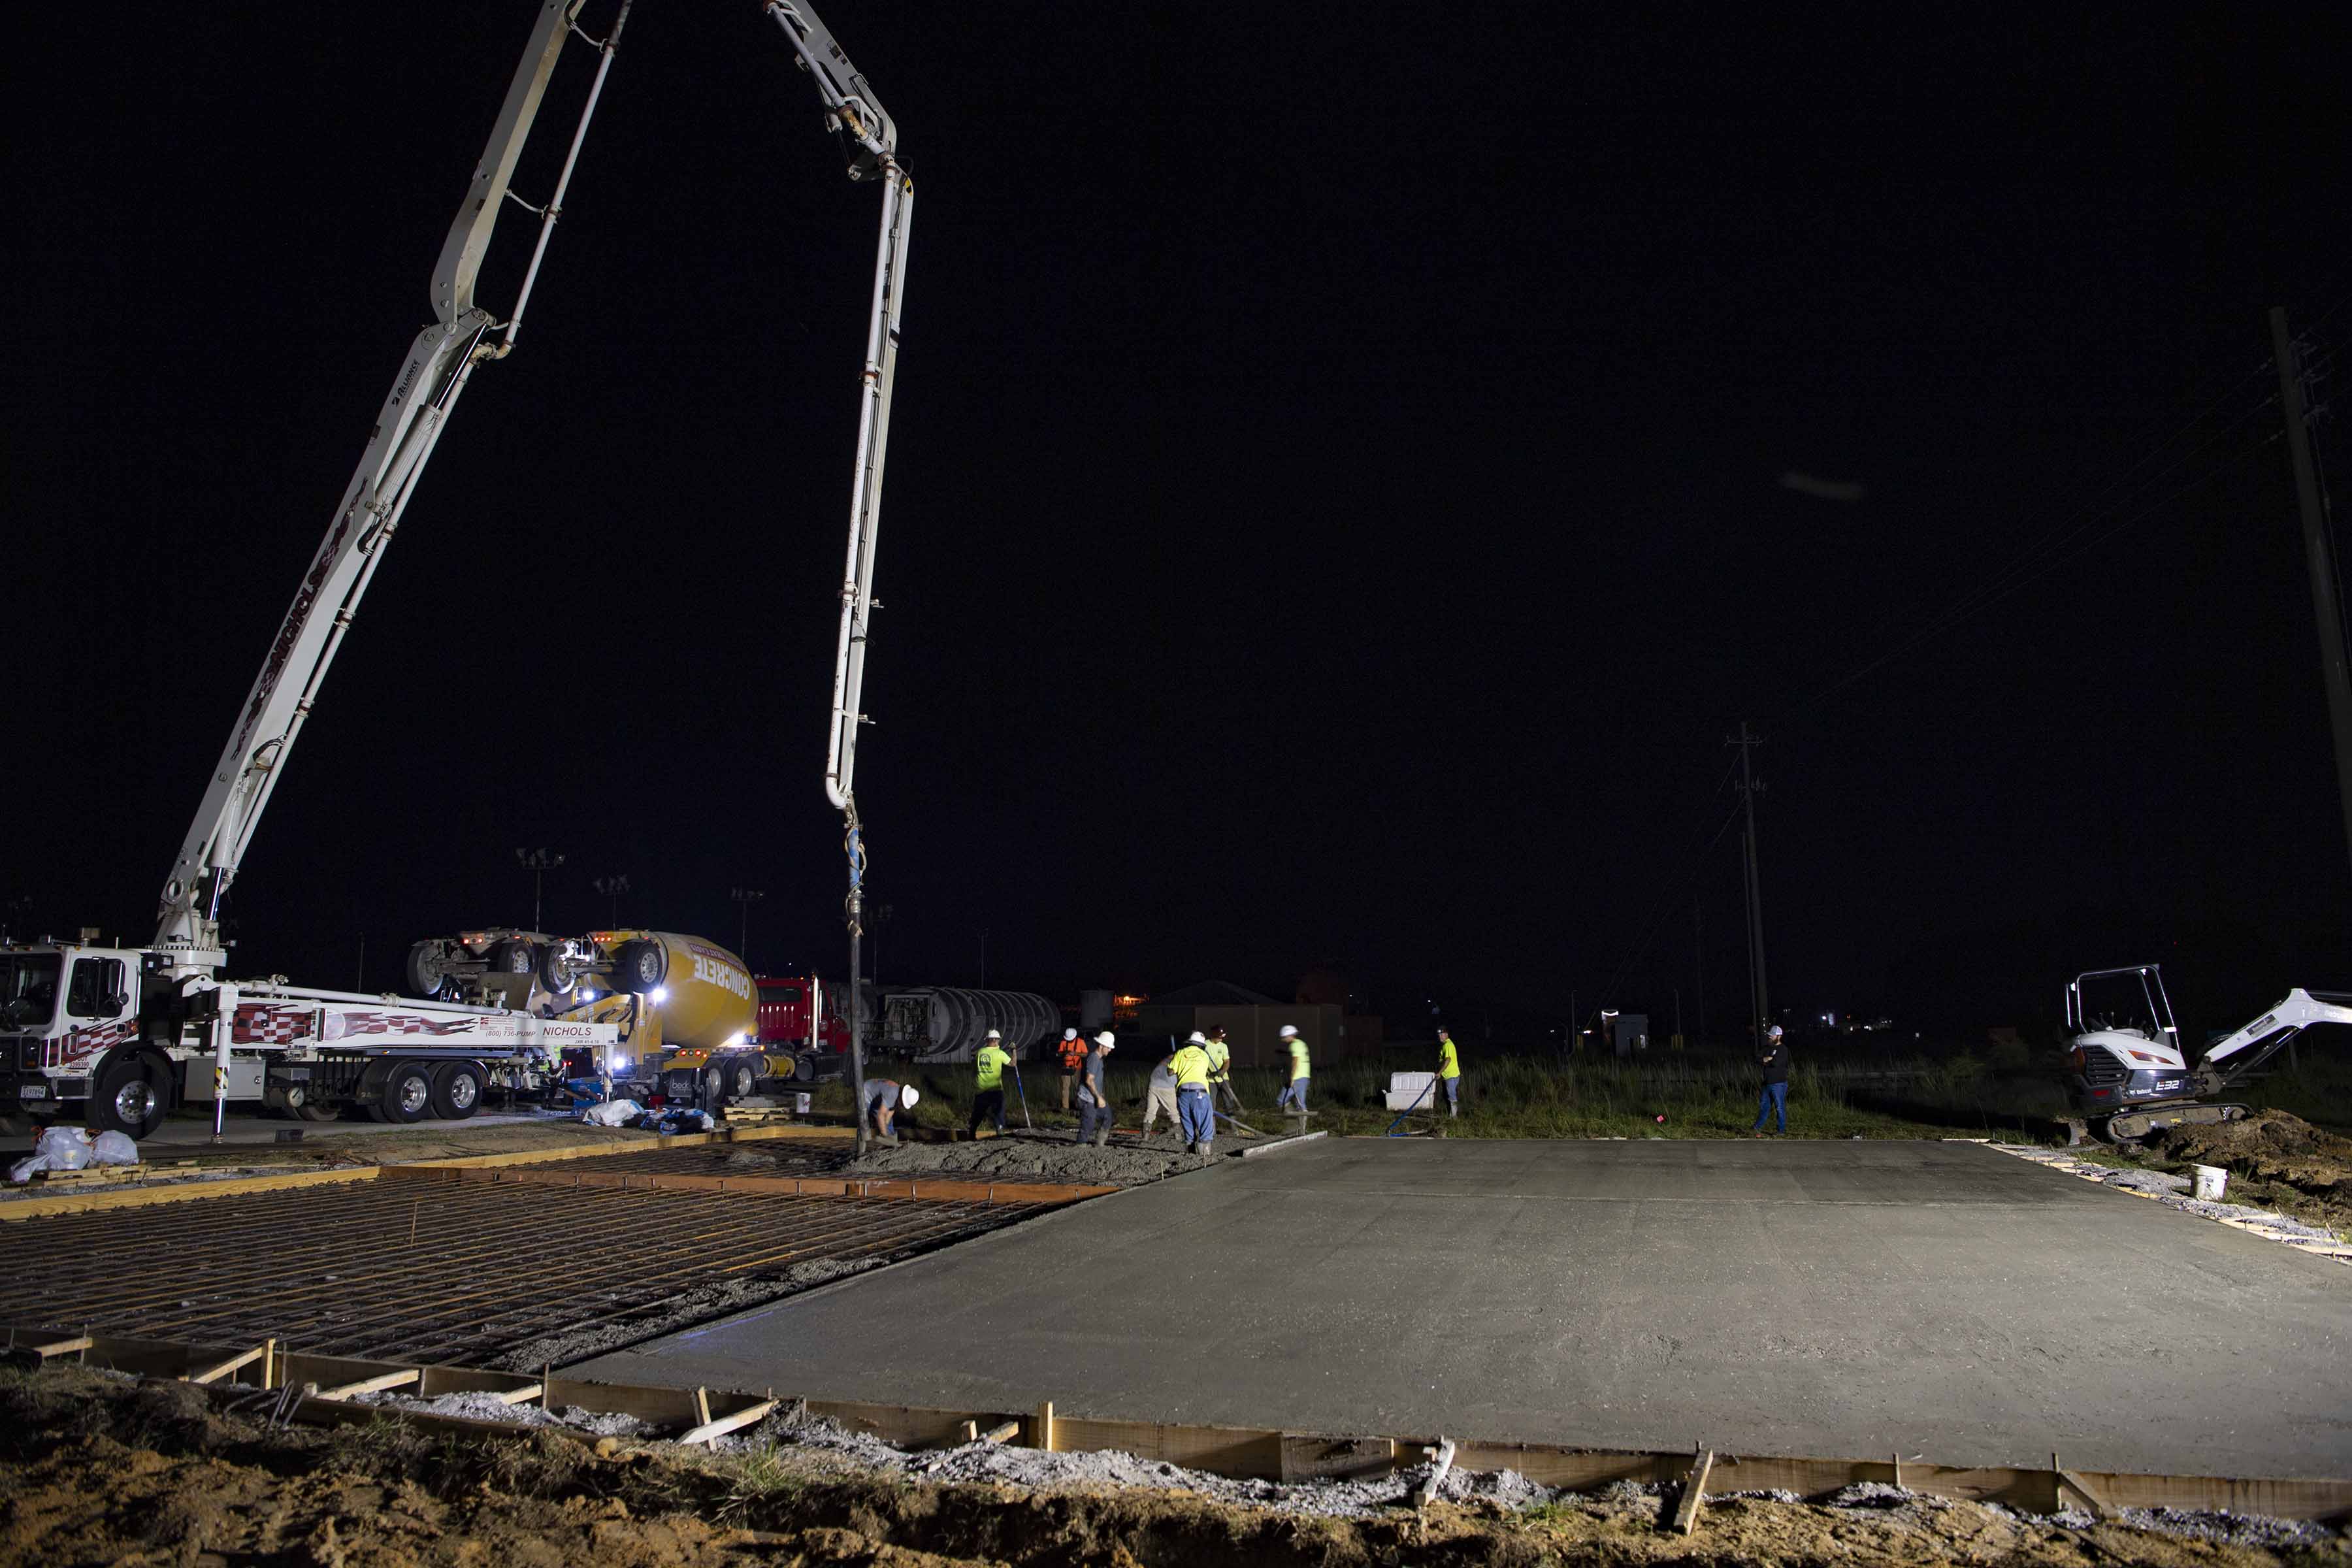 The ground is being prep for new test area at Stennis Space Center.